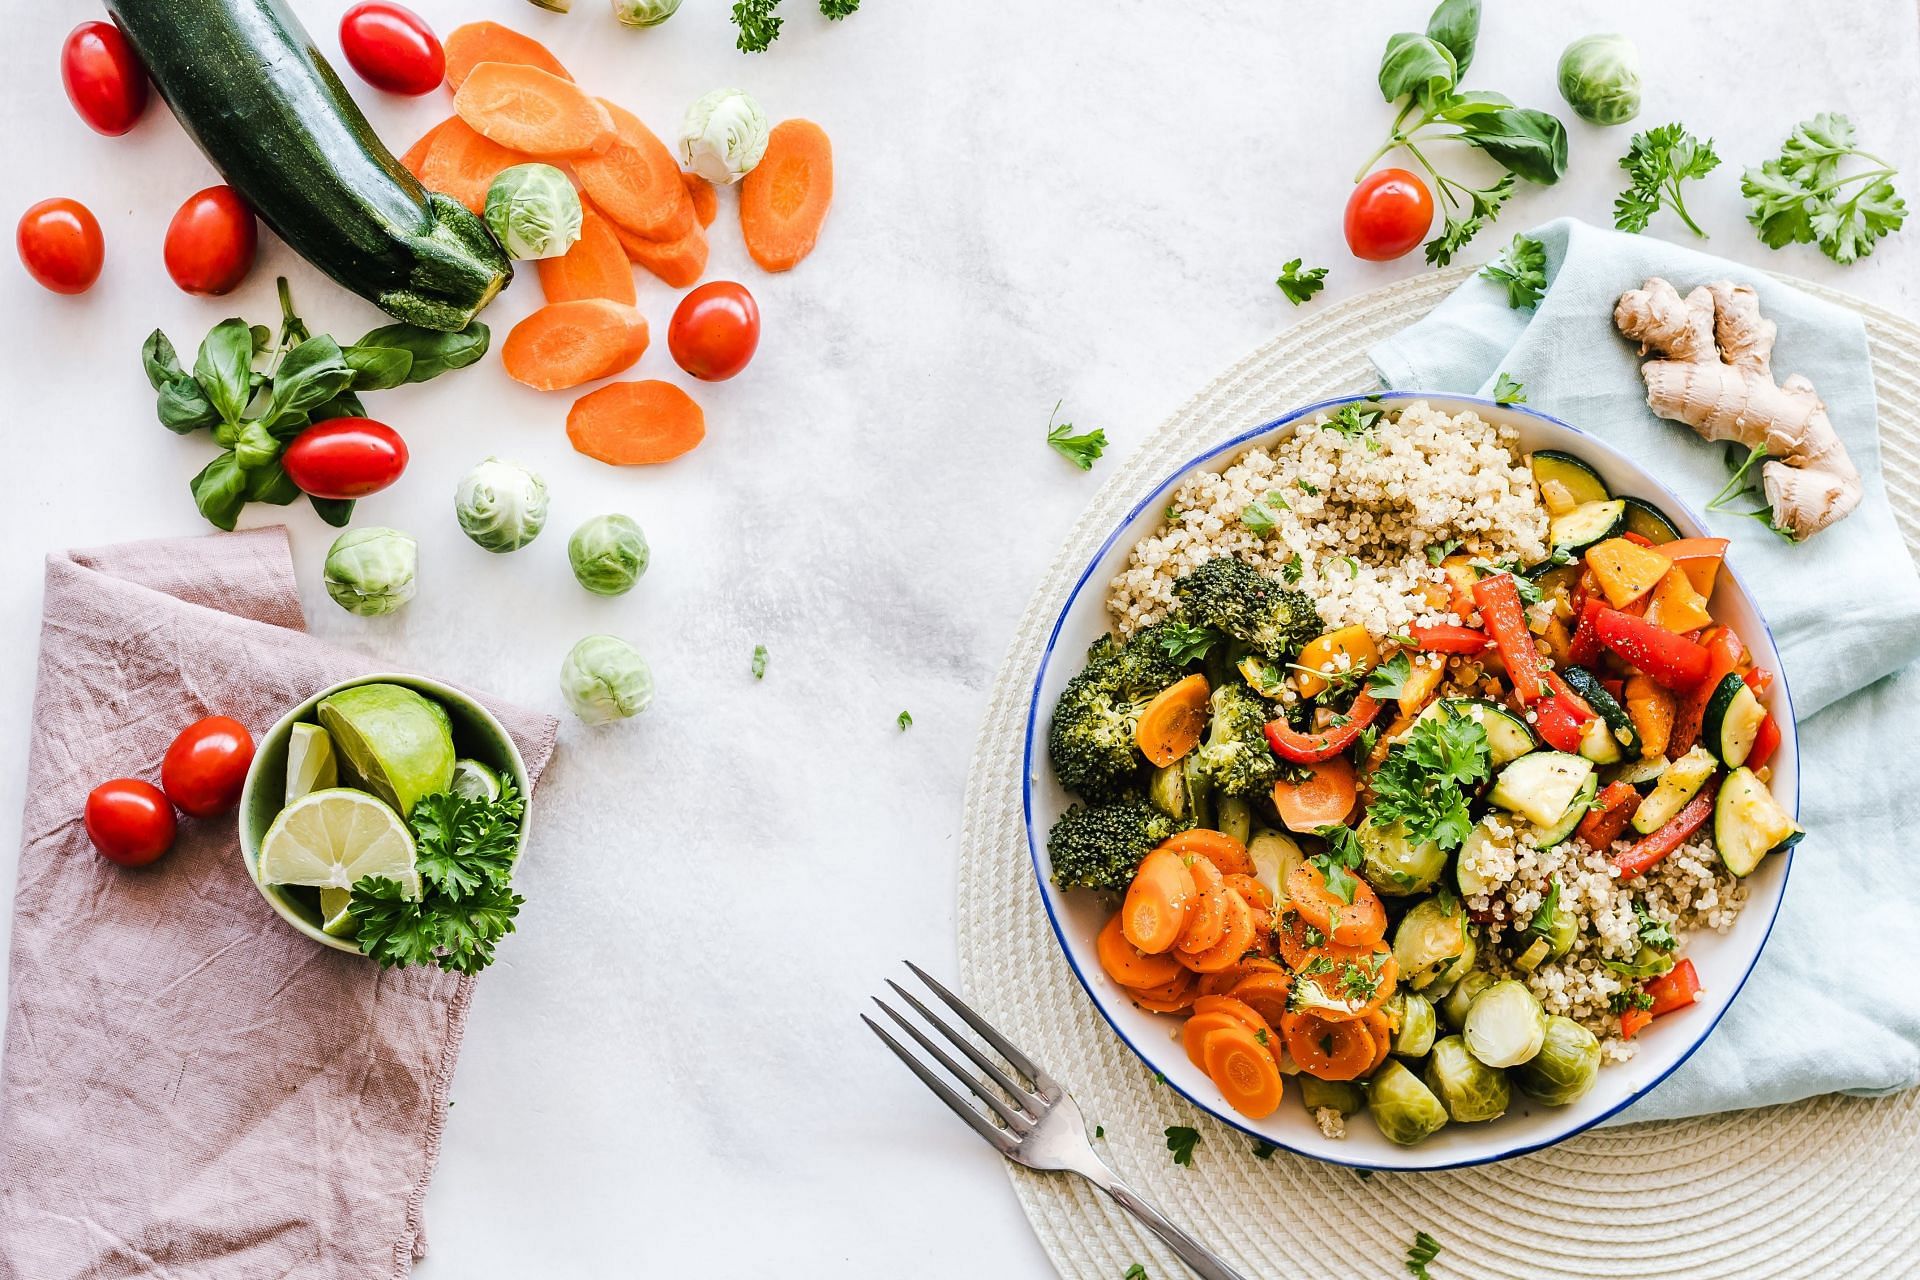 healthy foods to eat everyday (image sourced via Pexels / Photo by ella olsson)